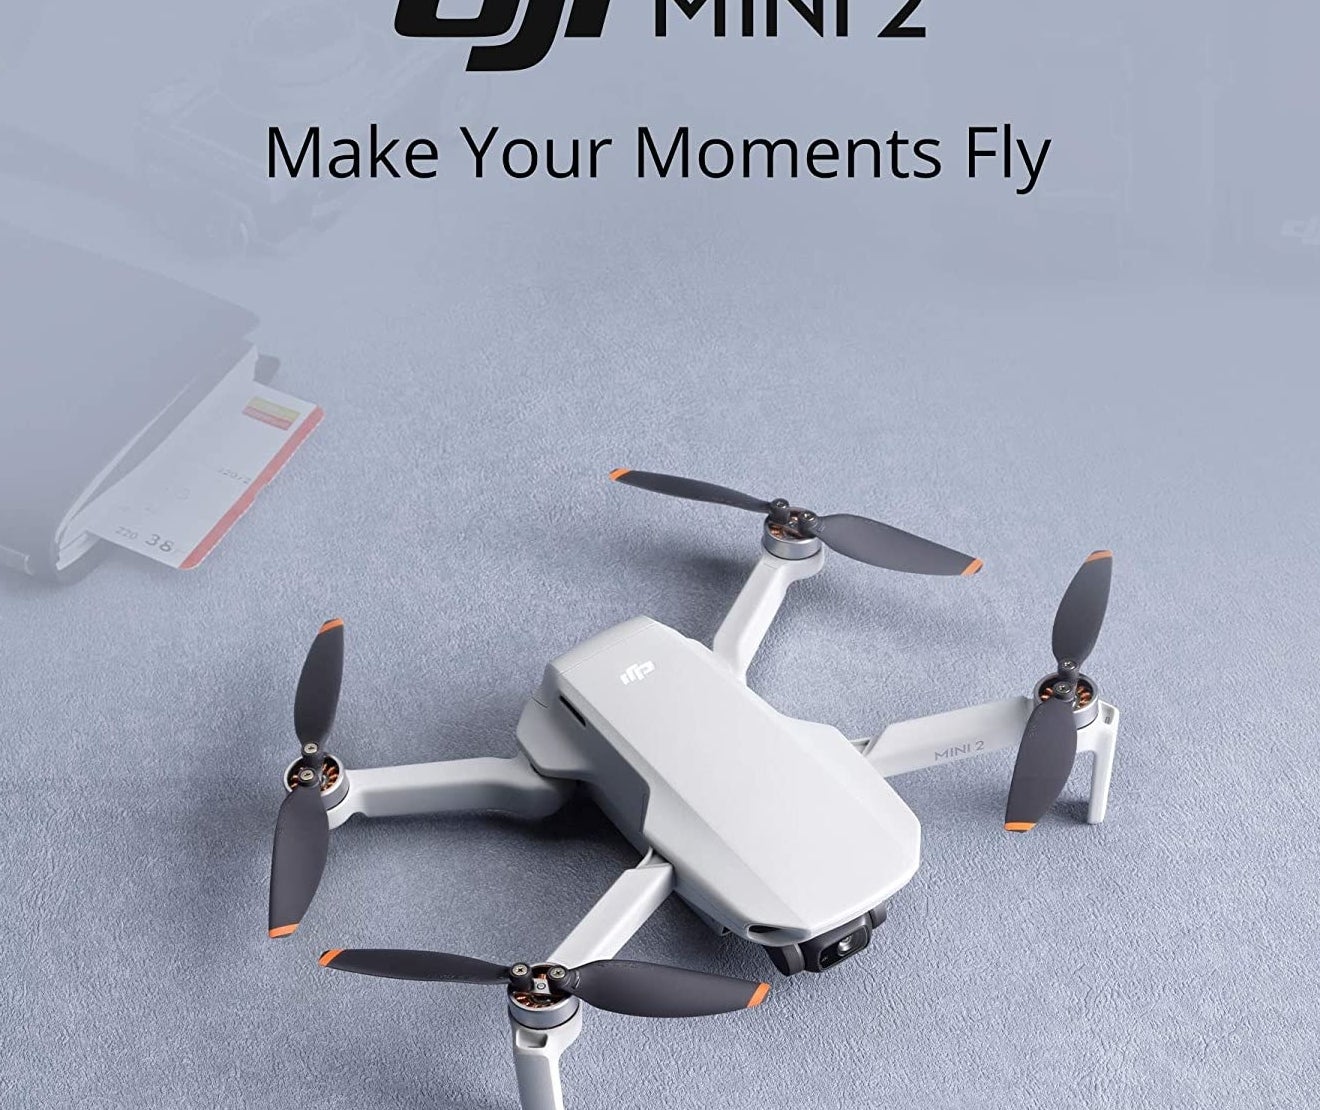 the drone camera on a plain background